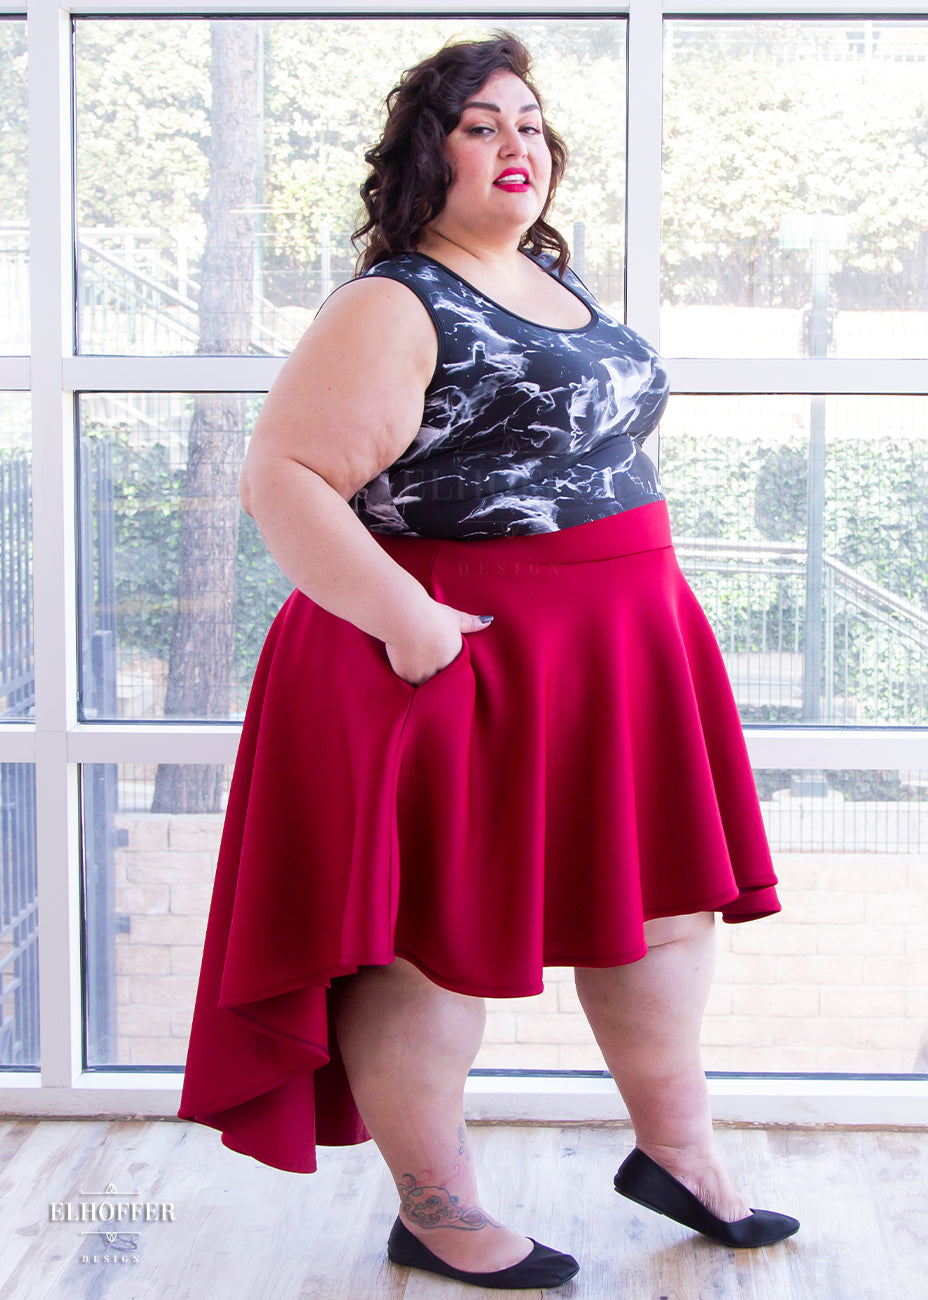 Kristen, a size 3XL olive skinned model with short dark brown hair, is wearing a burgundy commander skirt and a smoke print black and white tank. The skirt is a high waisted hi-low skirt that stands away from the body due to the double scuba fabric with encased elastic waistband with matching lining.